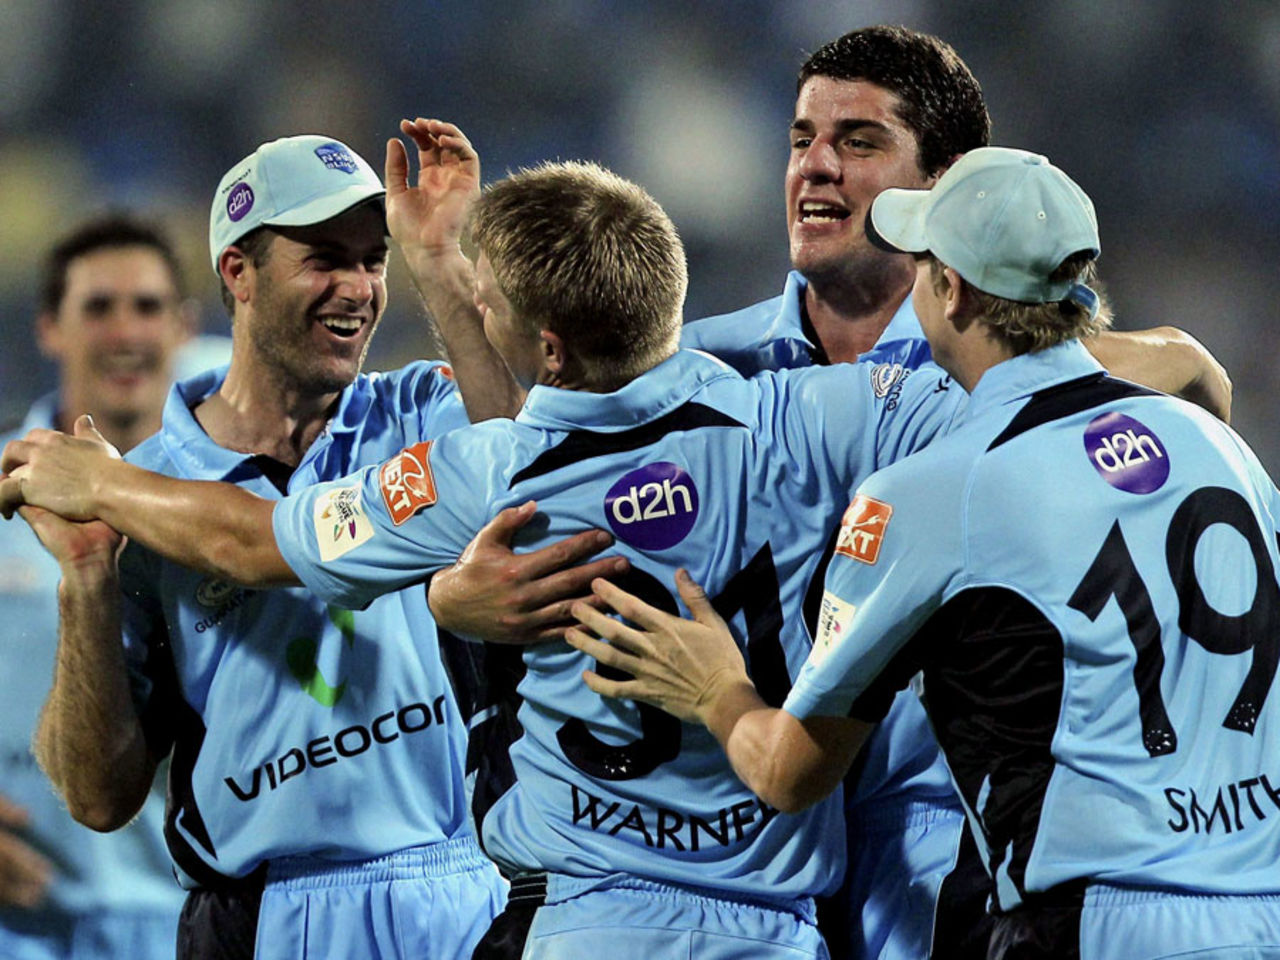 The New South Wales team celebrates their heart-stopping Super Over victory, New South Wales v Trinidad & Tobago, Champions League Twenty20, Chennai, September 28, 2011